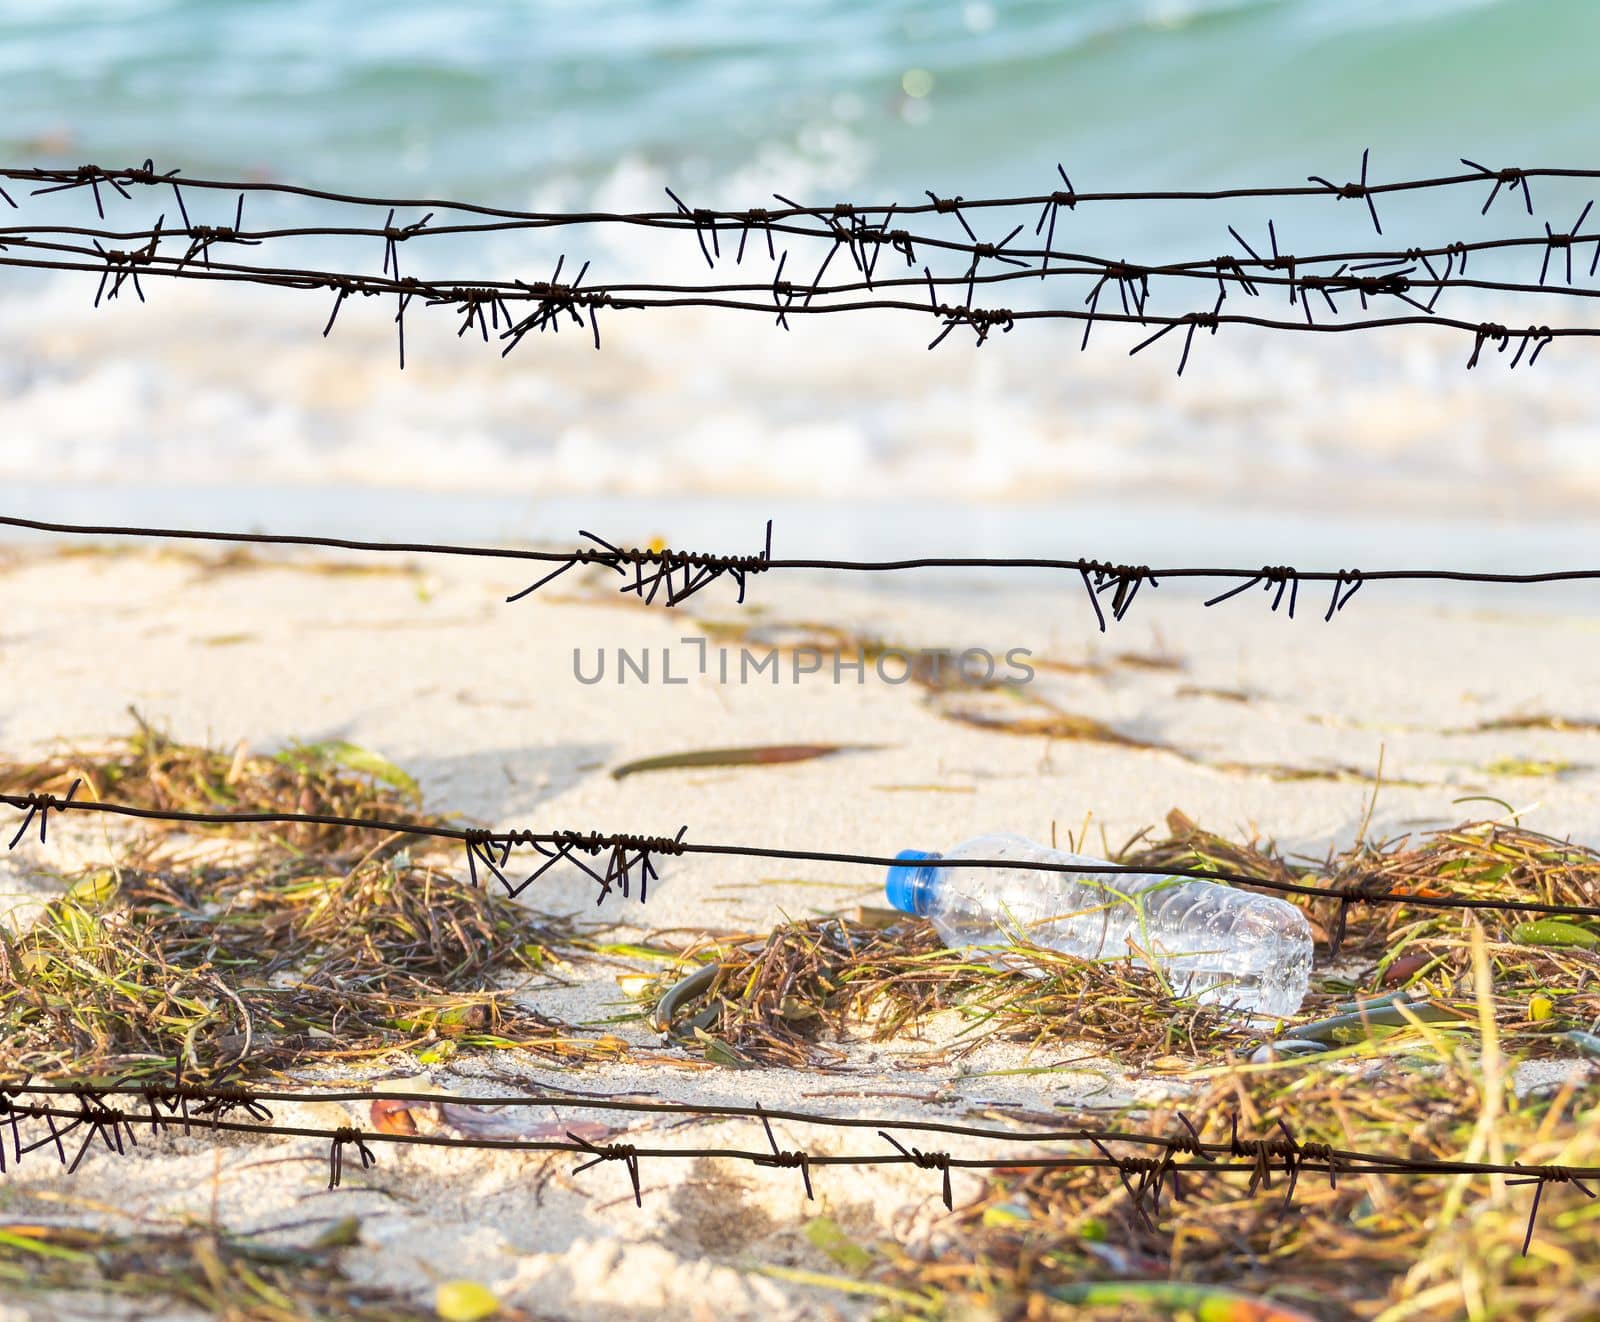 View through the barbed wire on a dirty beach filled with seaweed, garbage and empty plastic bottle on background